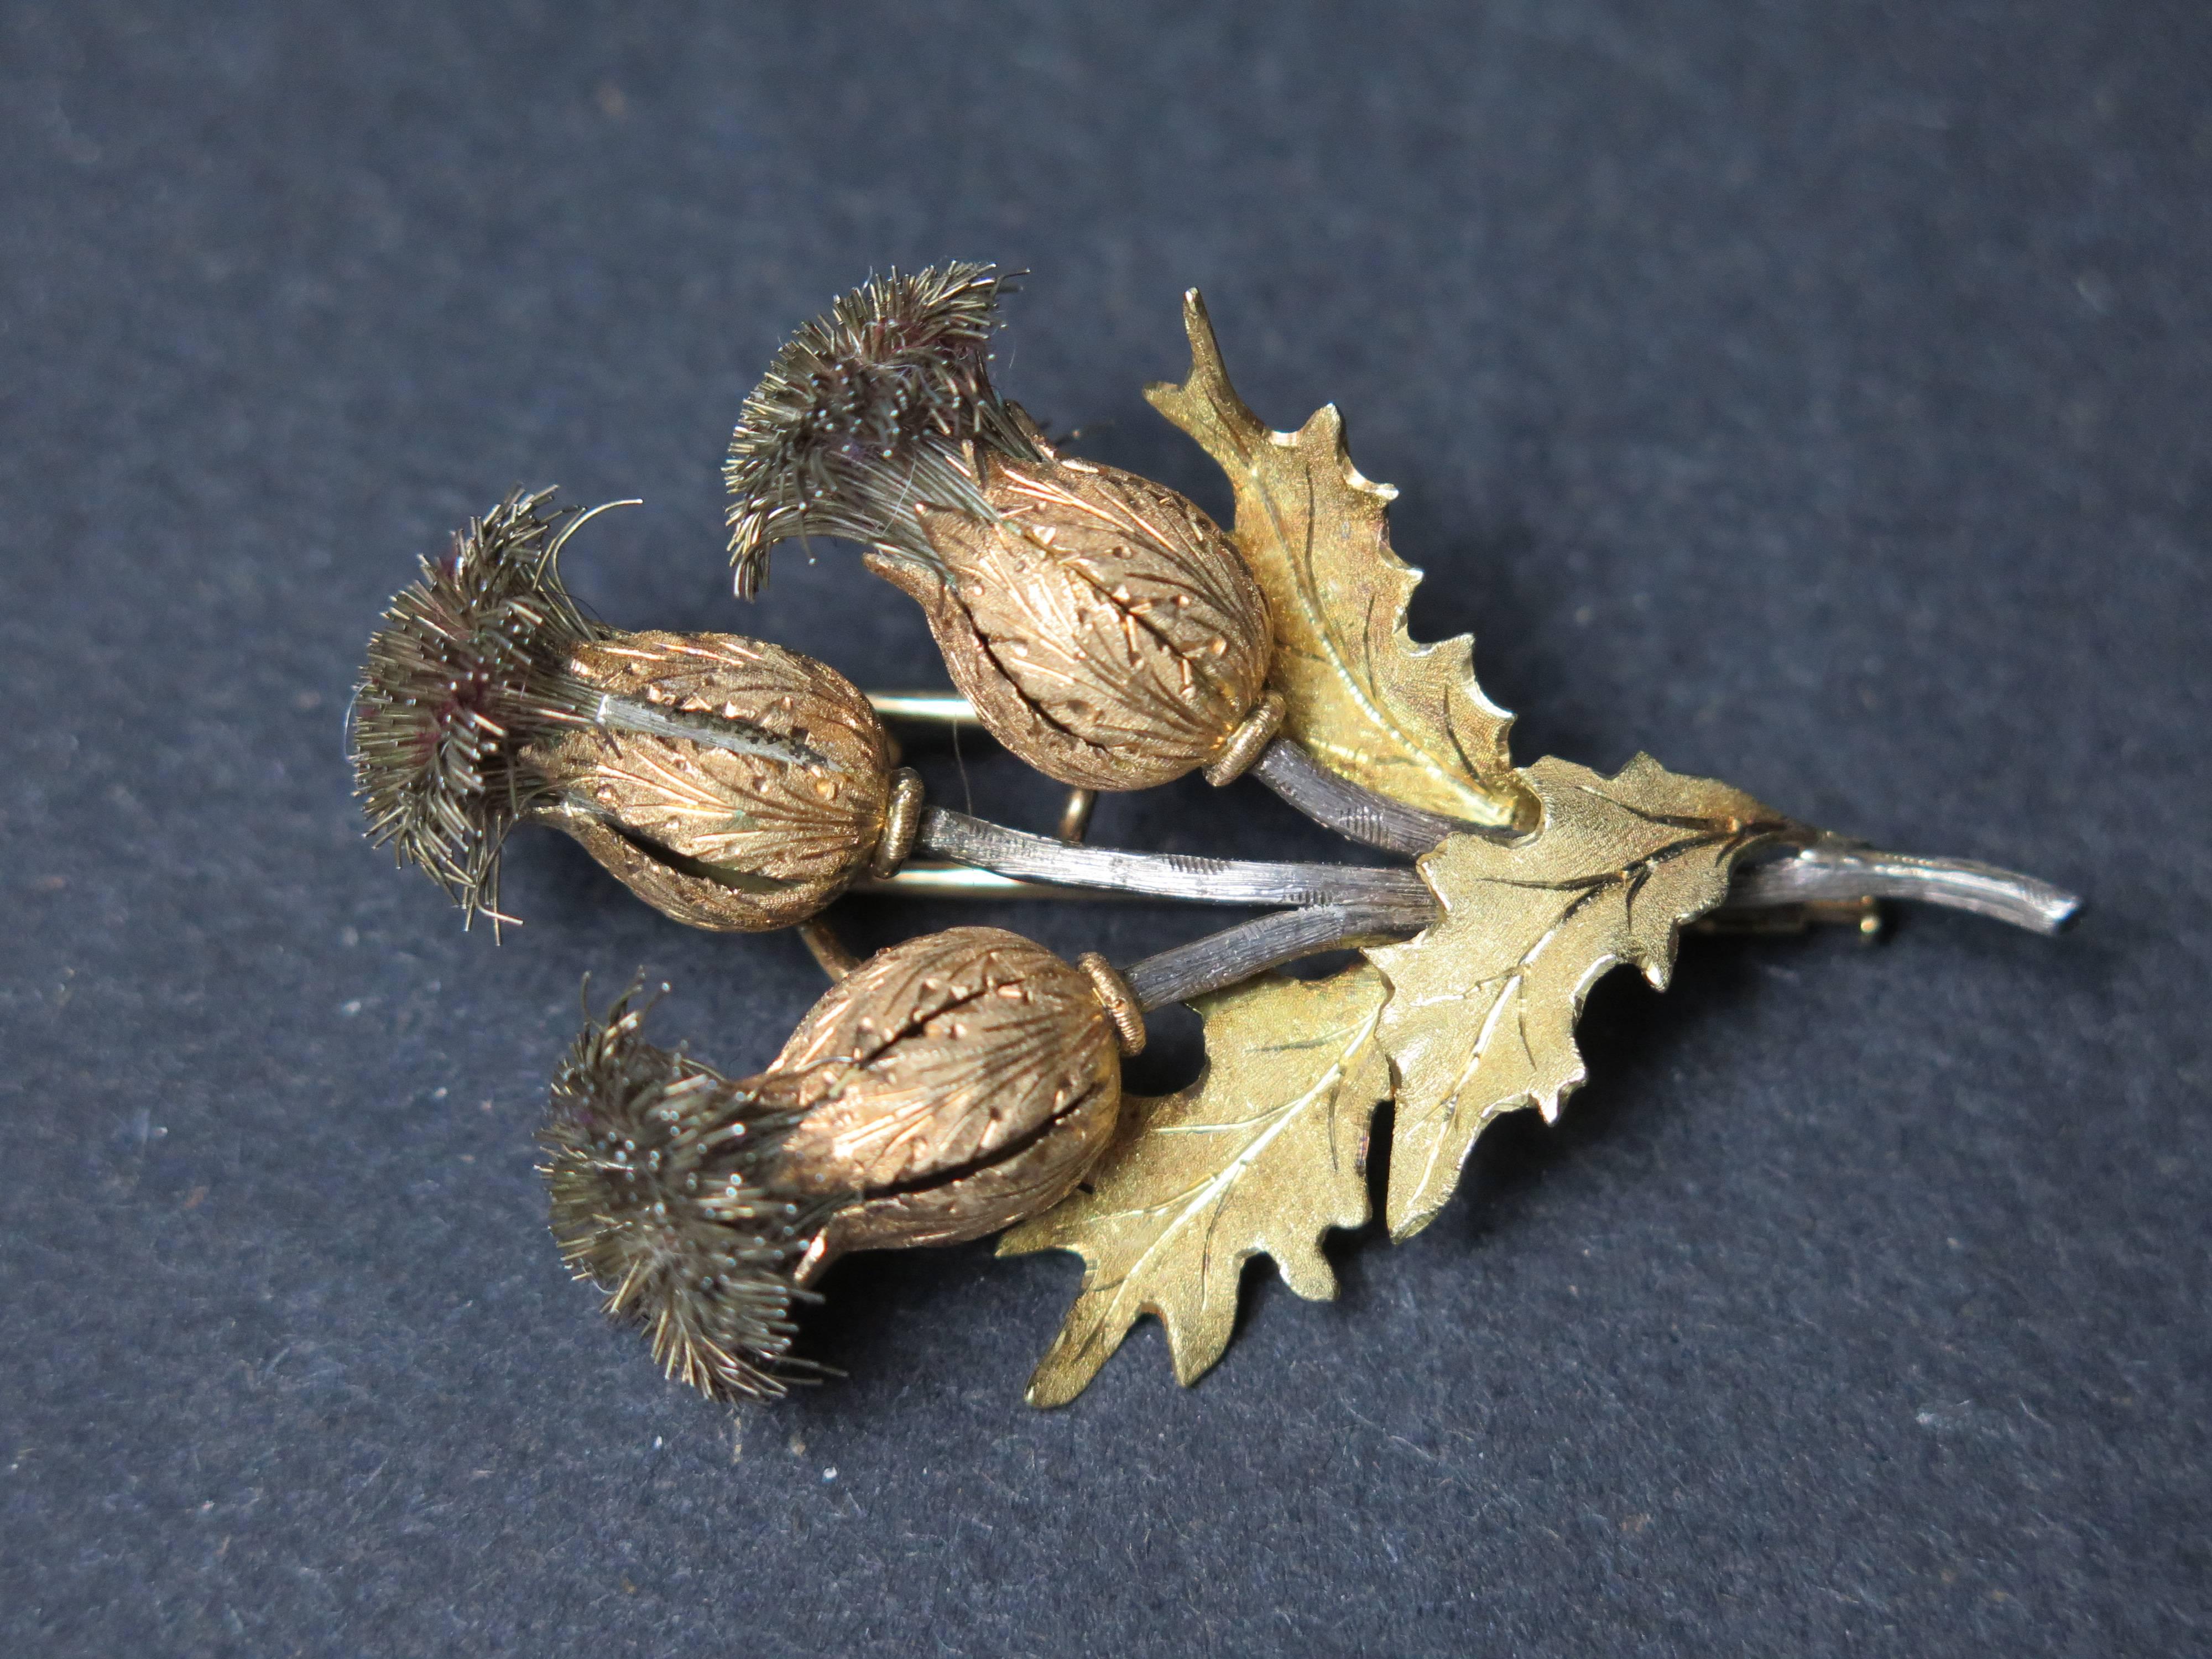 An exquisite triple thistle brooch by Mario Buccellati. The thistle heads crafted of textured rose gold, with silver wire thistles on textured silver stems, with 18k yellow gold leaves. Signed M. Buccellati and 750 for 18K gold.

2.25" high,